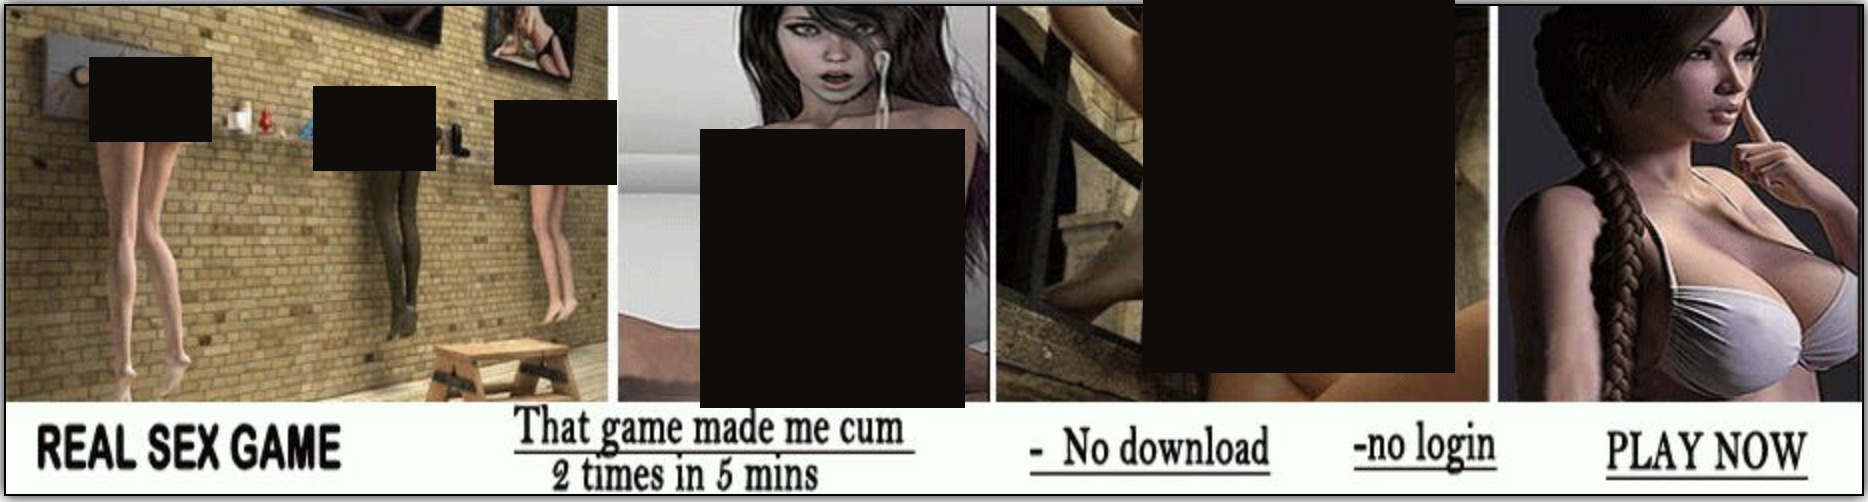 Cum In 5 Min Games - Video Game Porn: Inside X-Rated Adult Sex Games on Pornhub